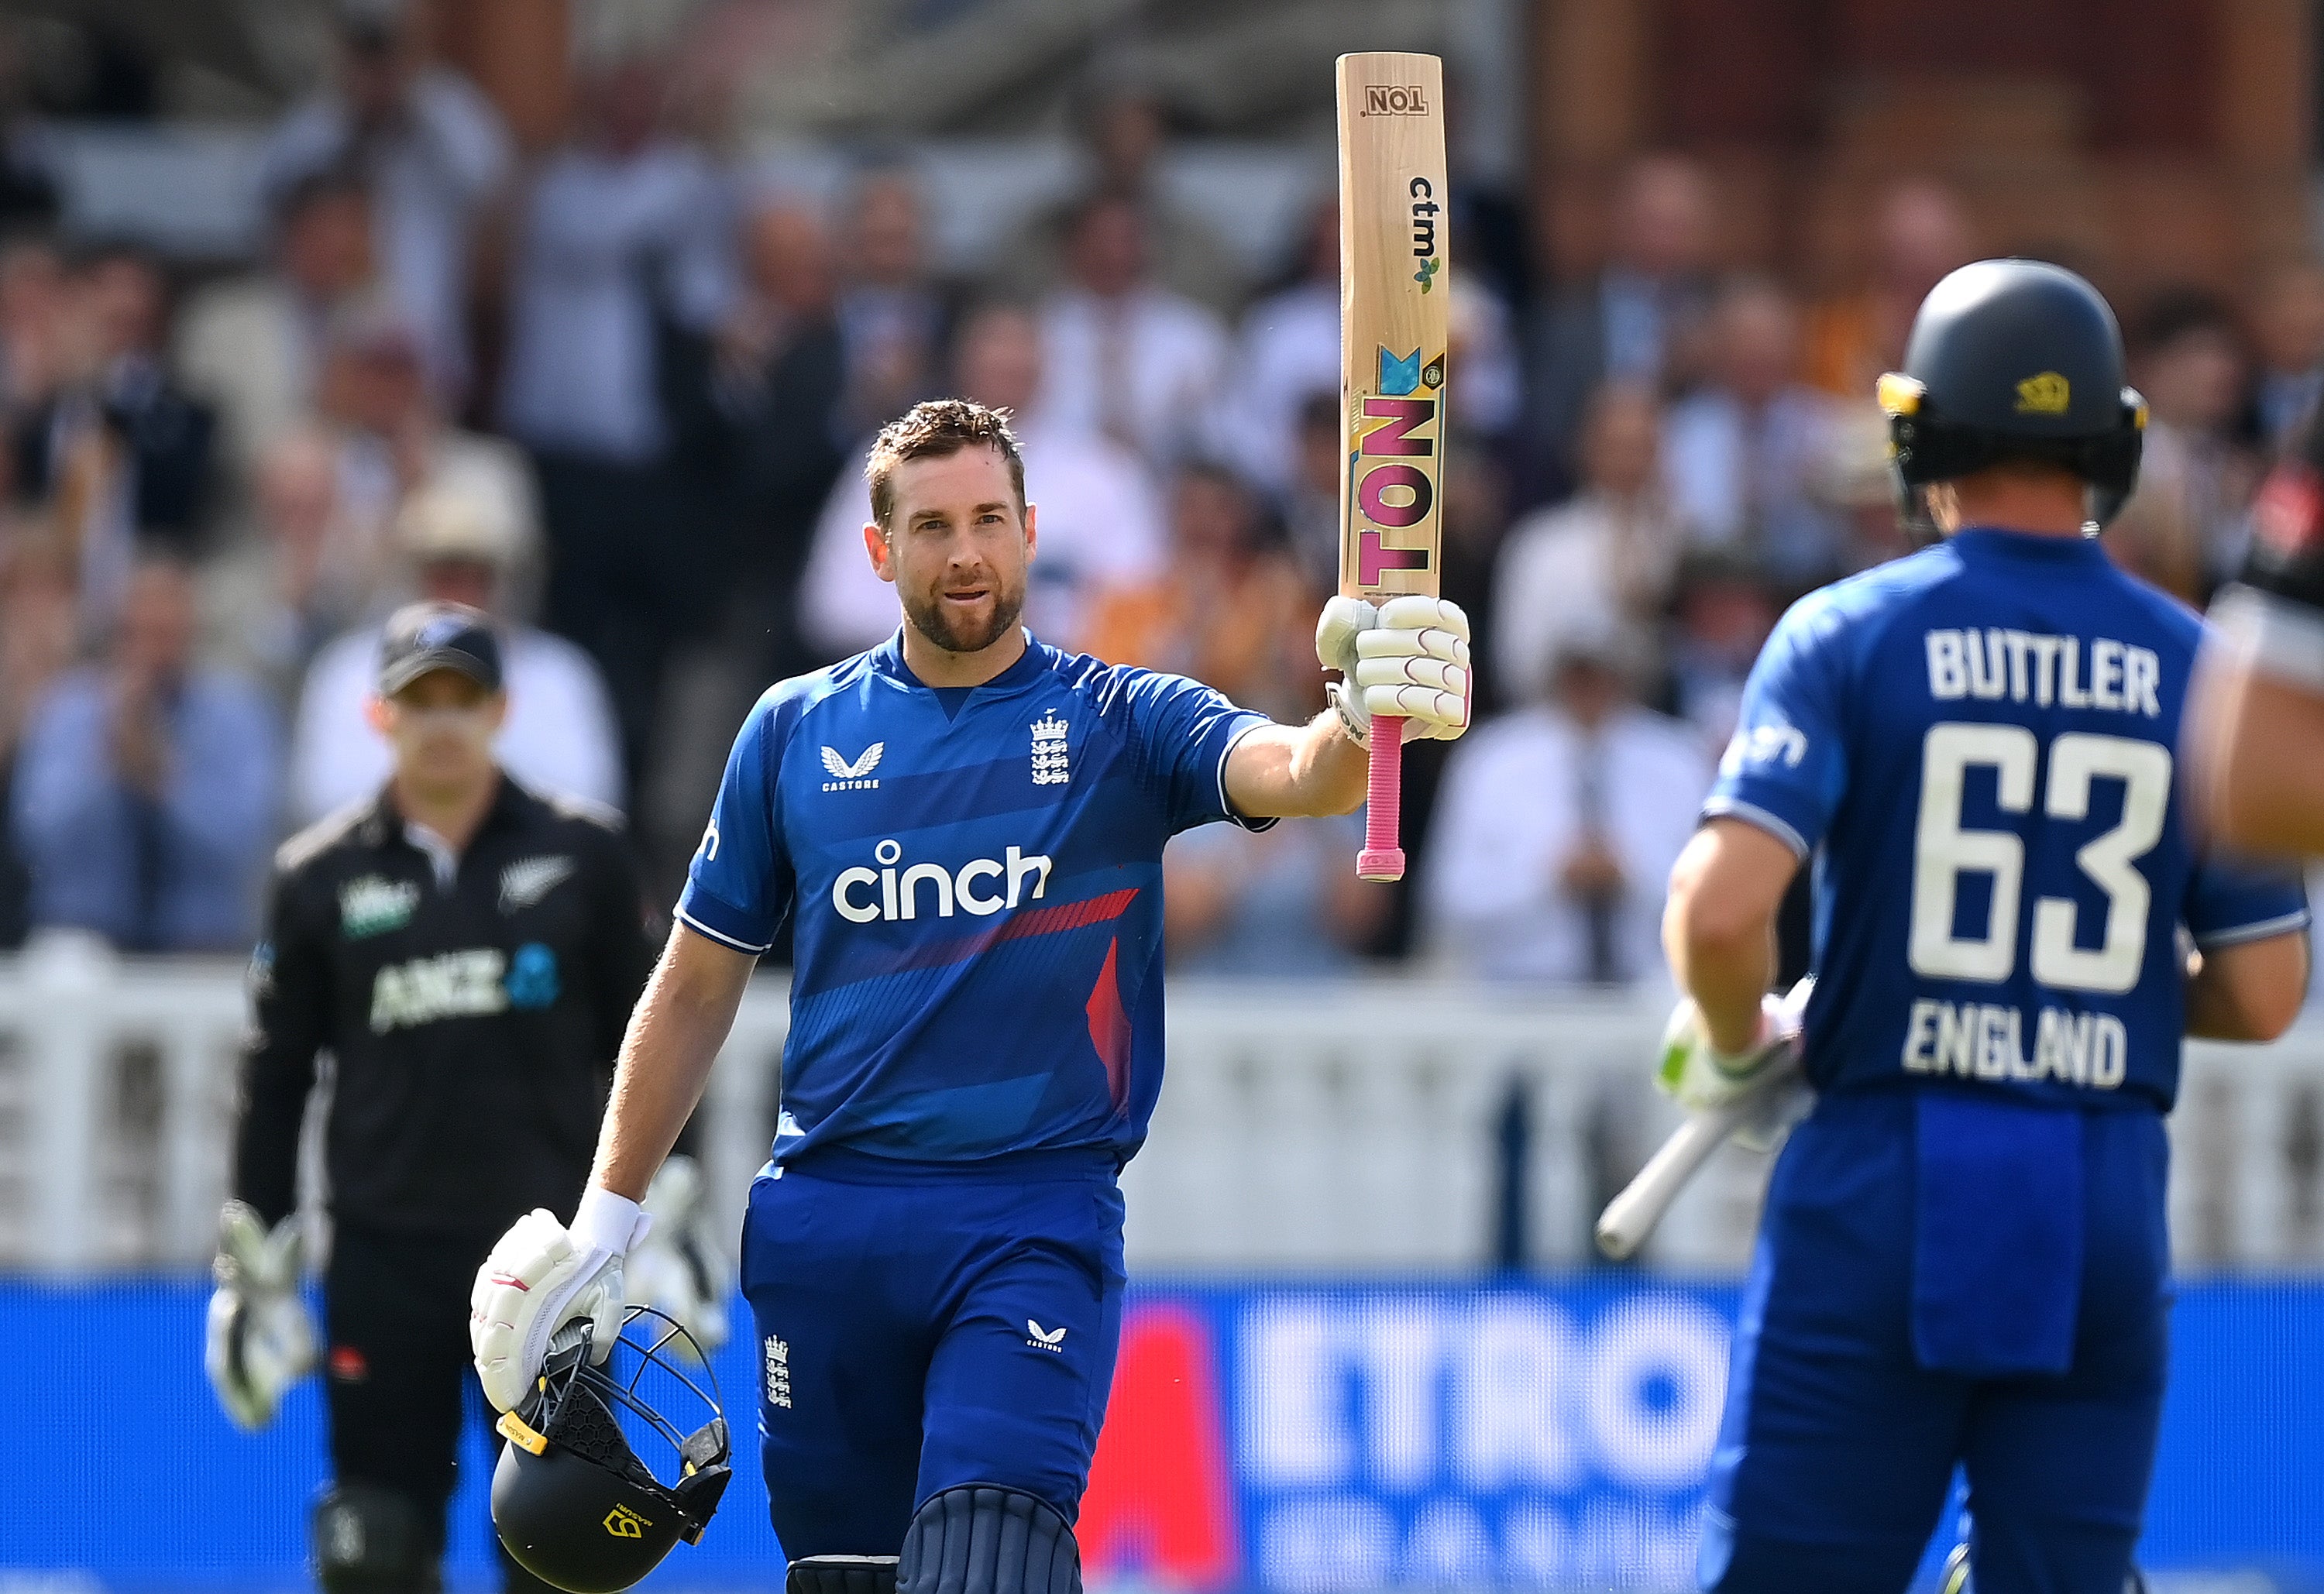 Dawid Malan scores a century at Lord’s